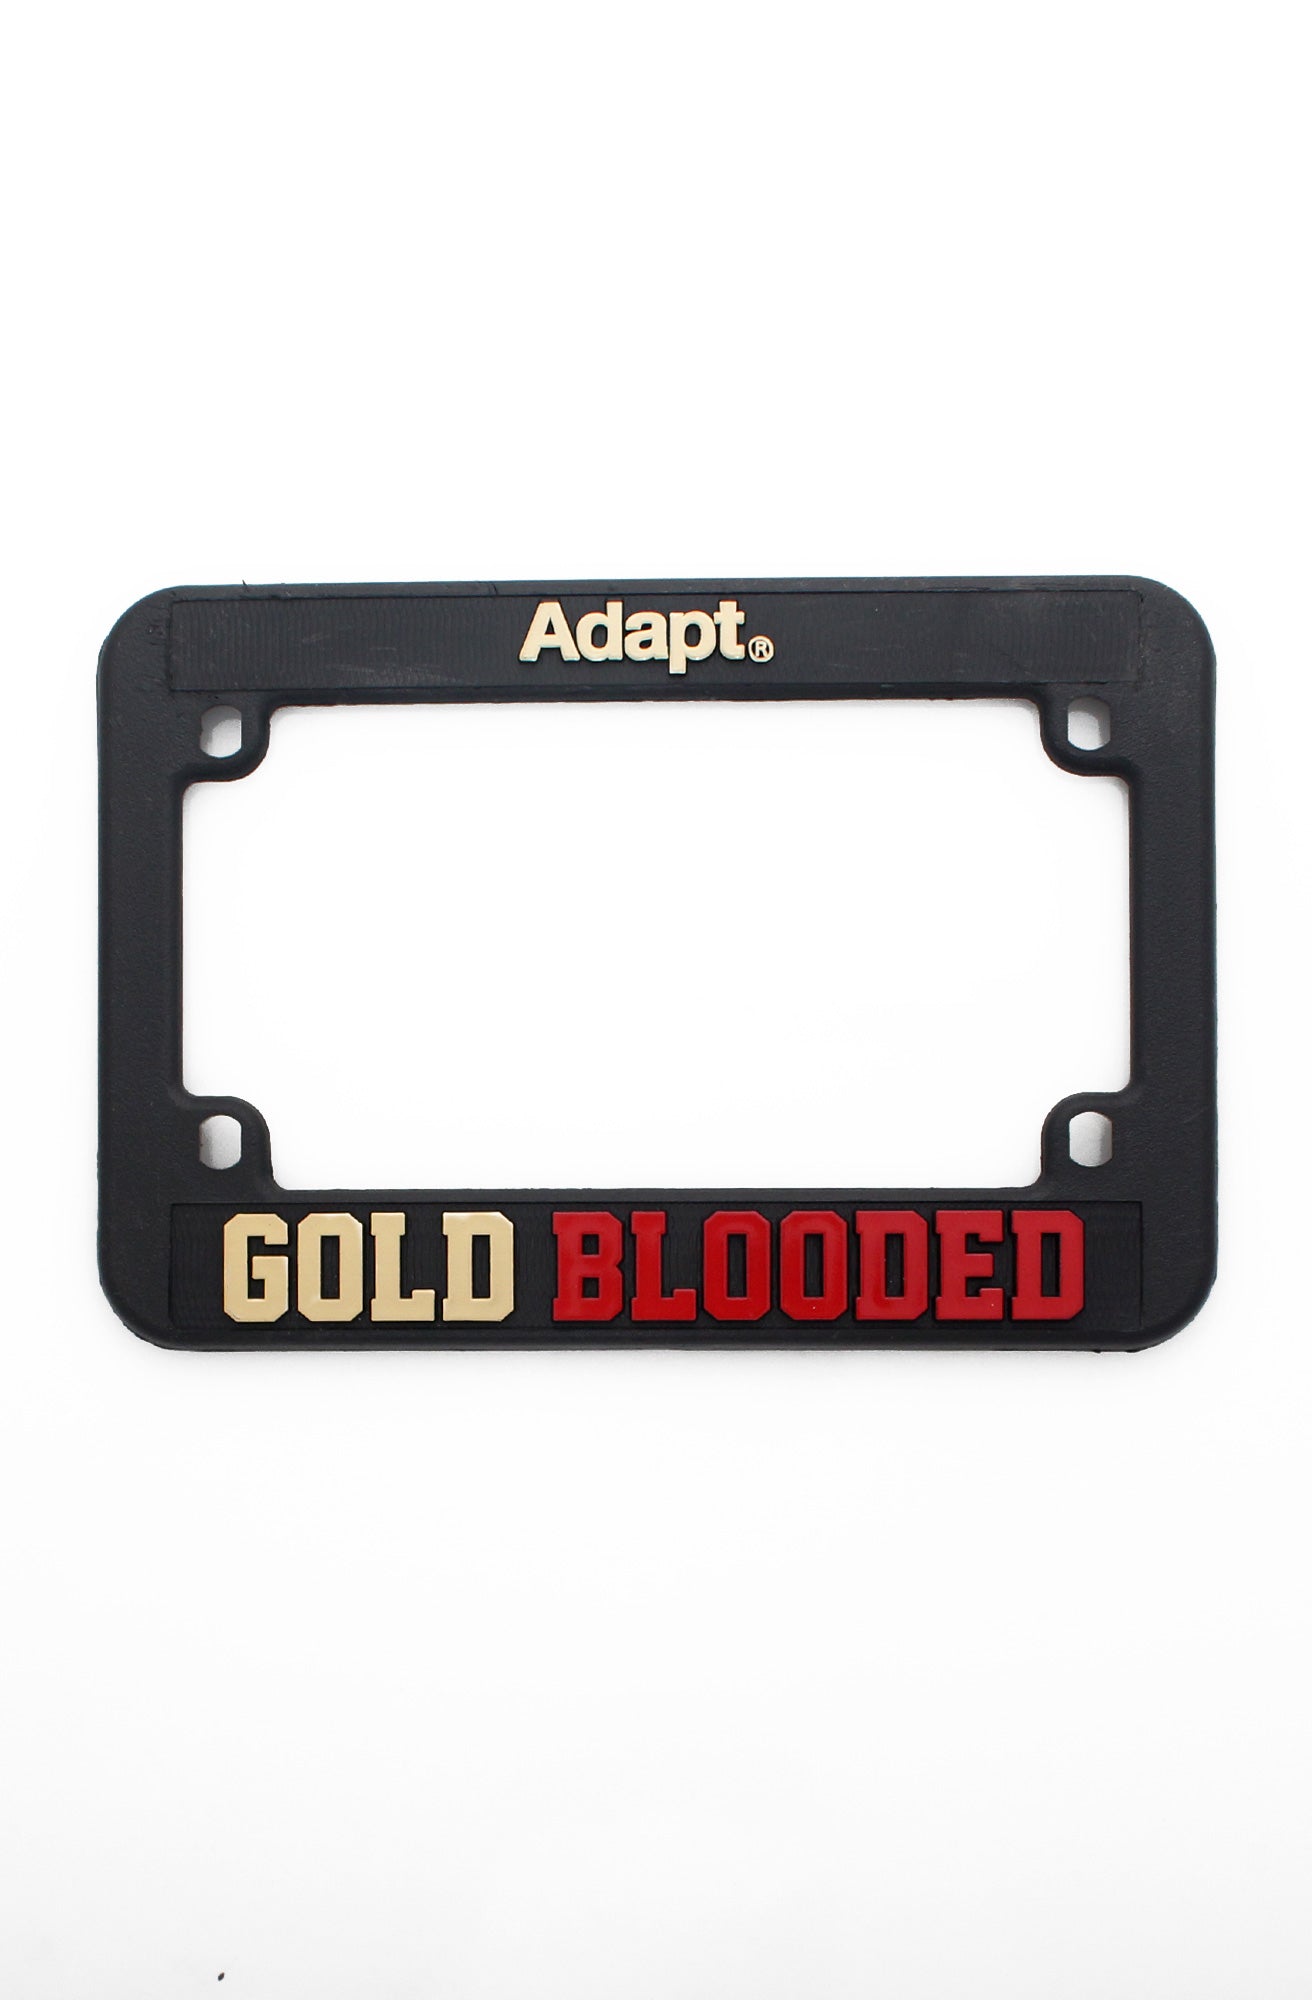 Gold Blooded (Black/Red Motorcycle License Plate Frame)